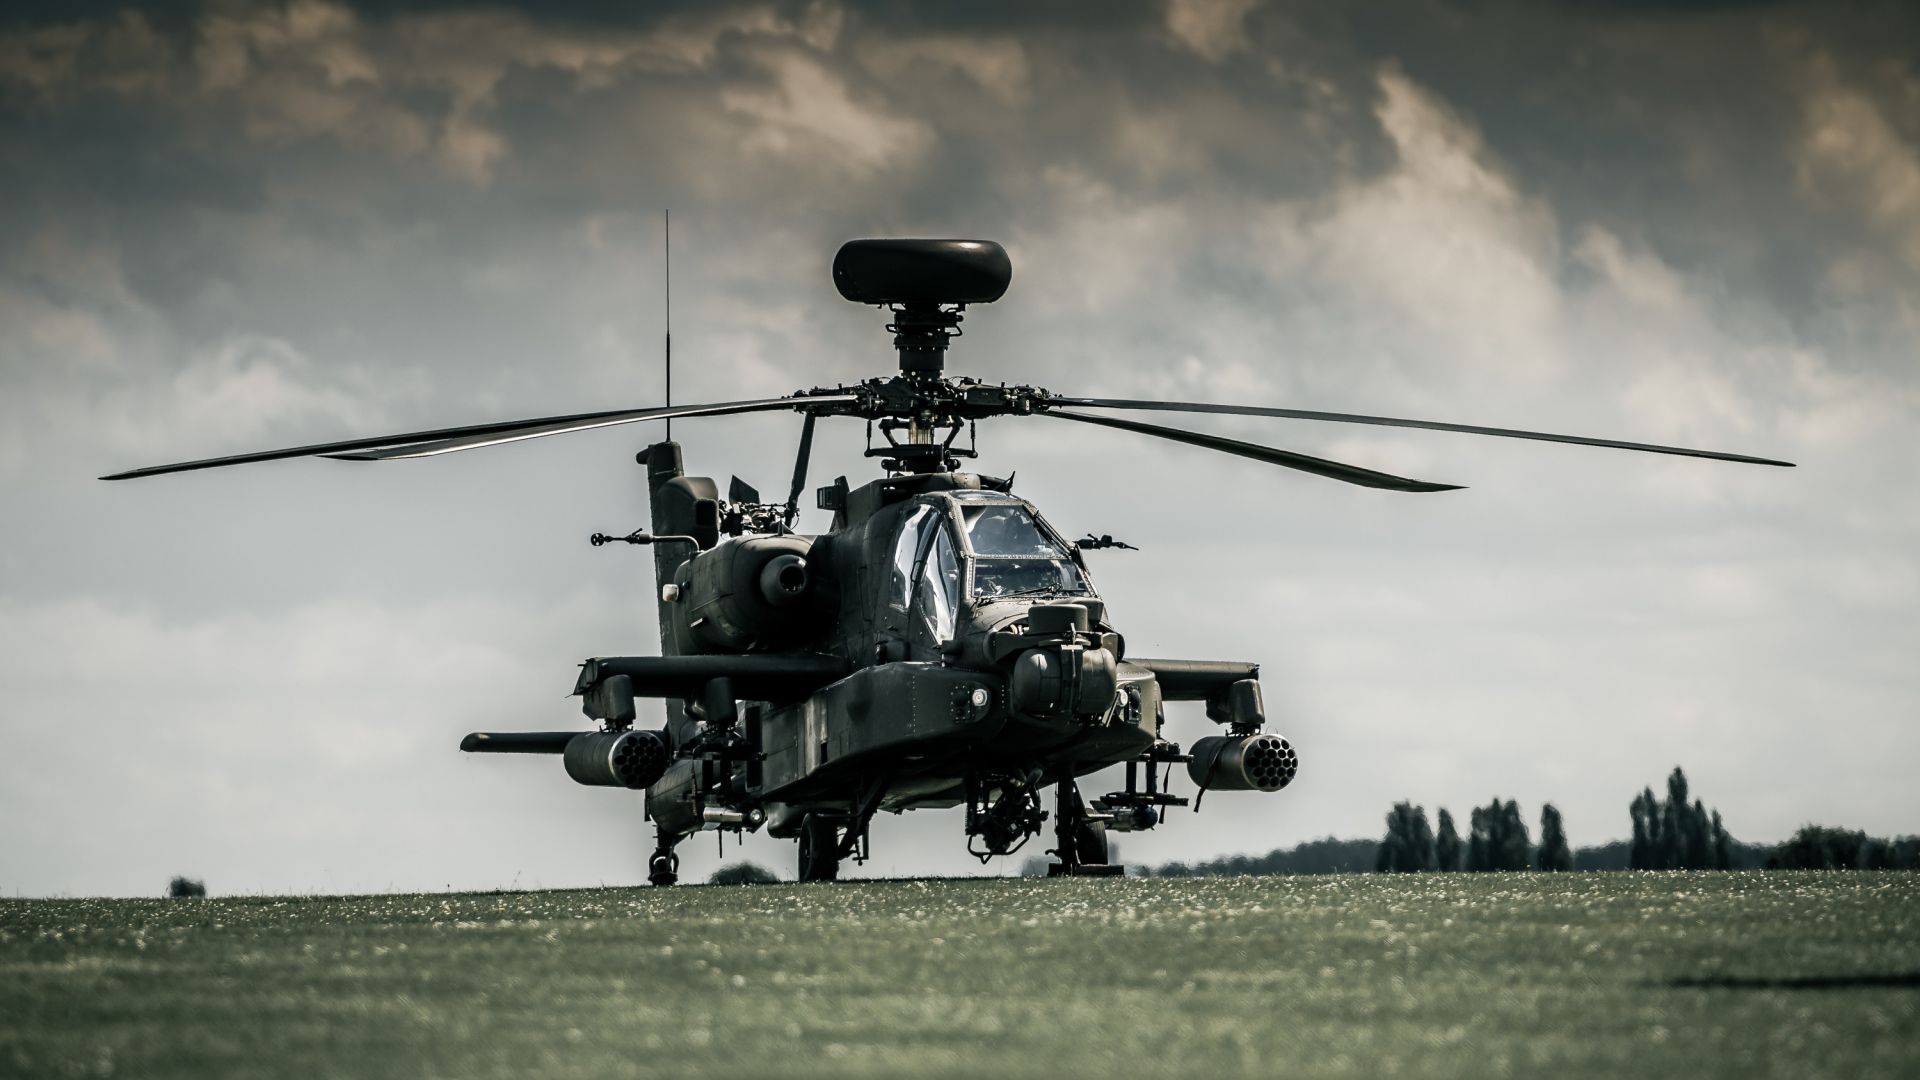 AH-64D Apache, attack helicopter, Royal Air Force, dark sky (horizontal)